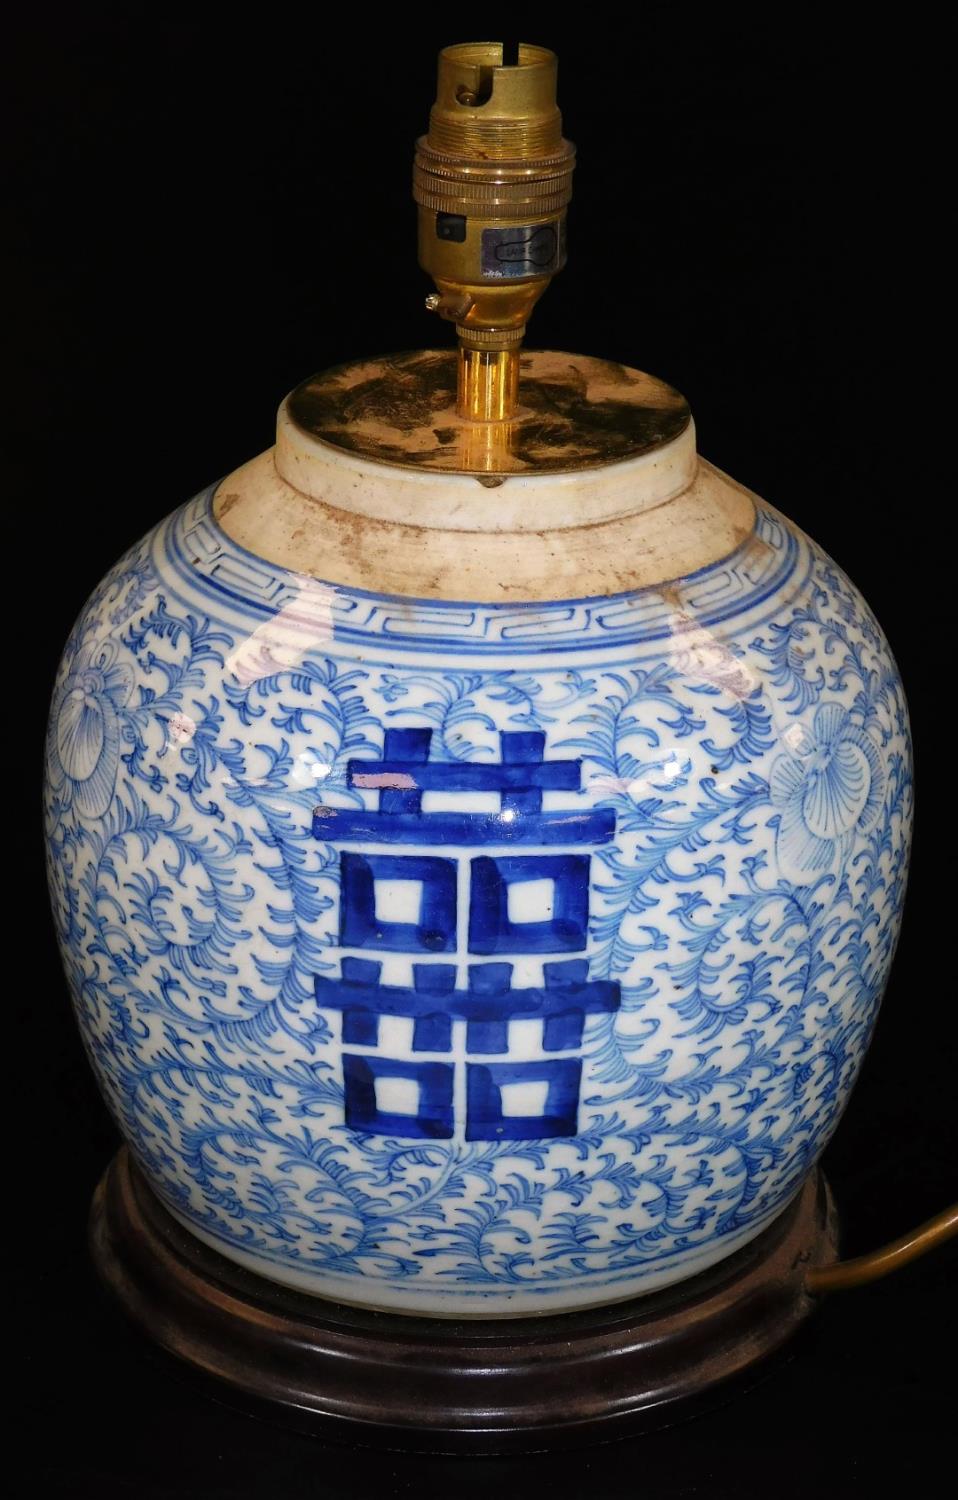 A Chinese blue and white porcelain ginger jar converted to a lamp, with scrolling lotus foliage - Image 3 of 4